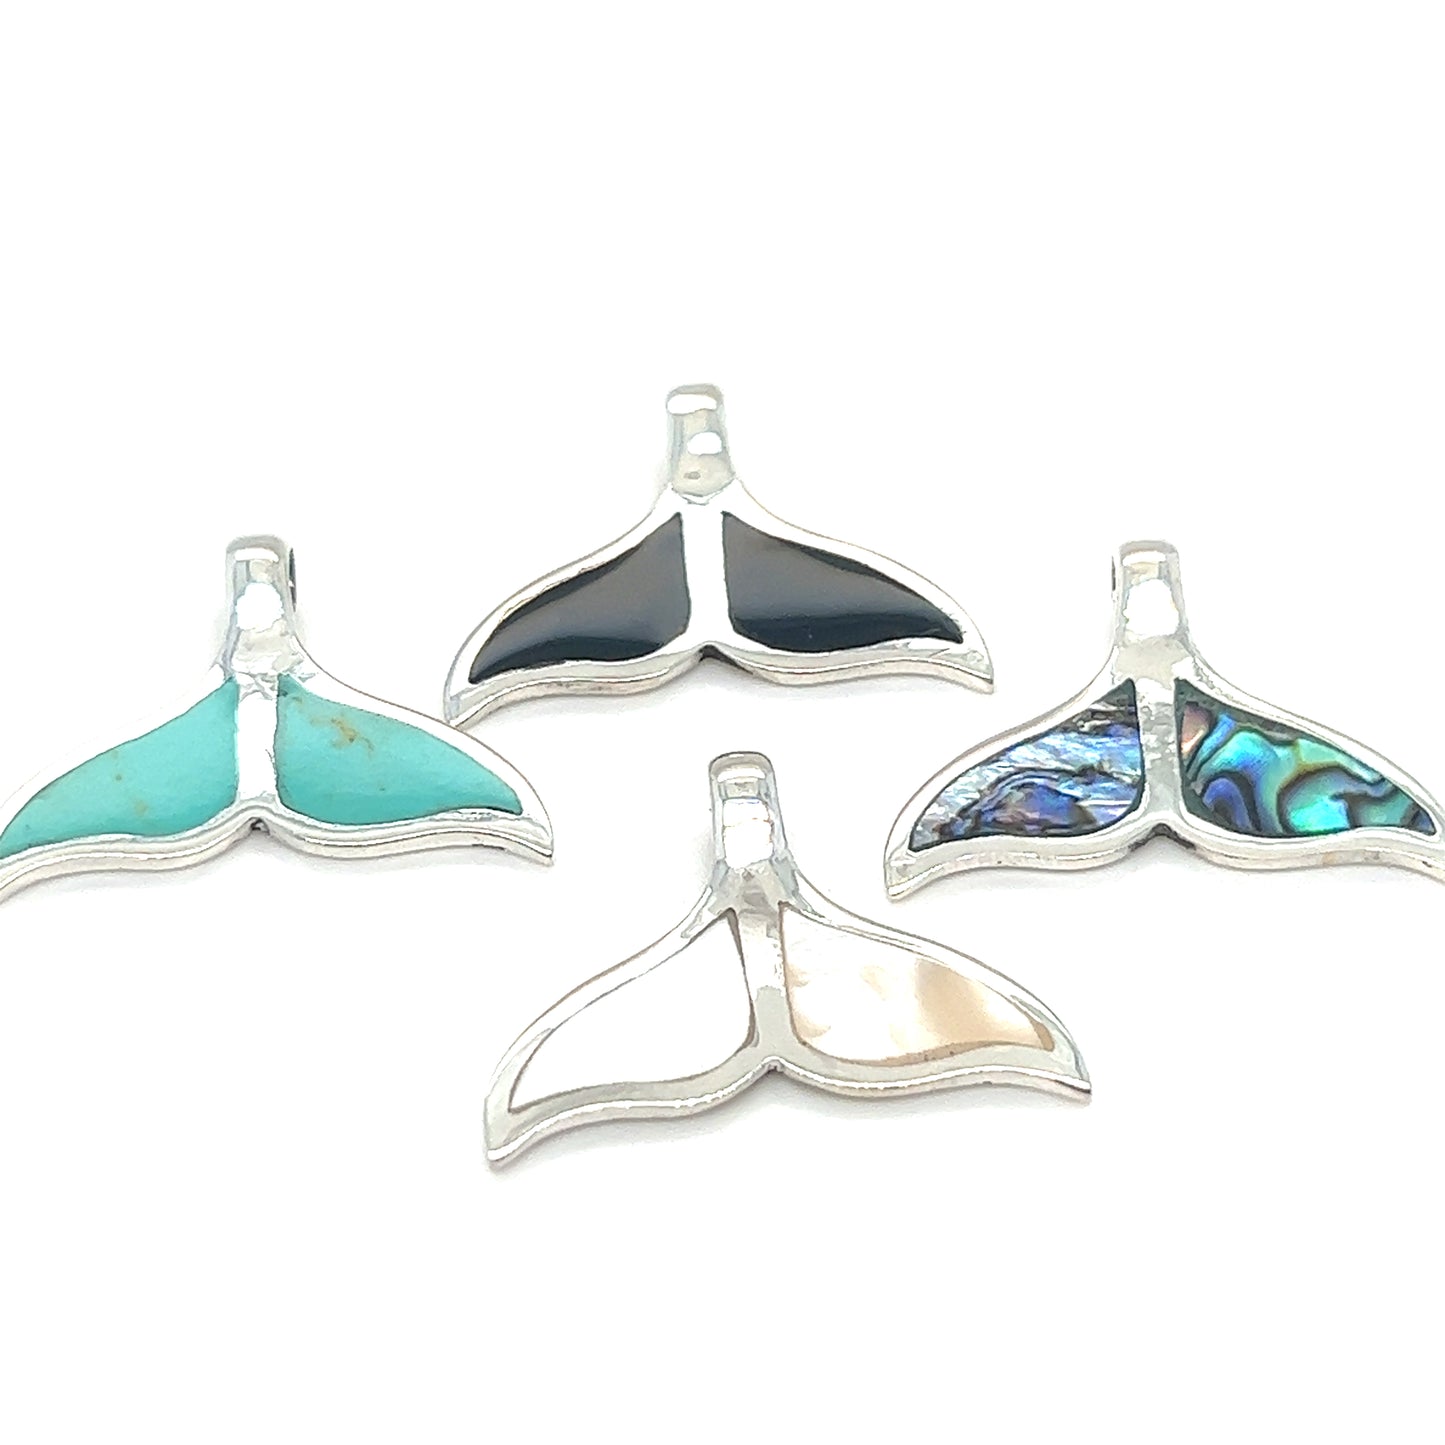 Four Super Silver Inlay Whale Tail Pendants with turquoise stones, evoking the beauty of the ocean.